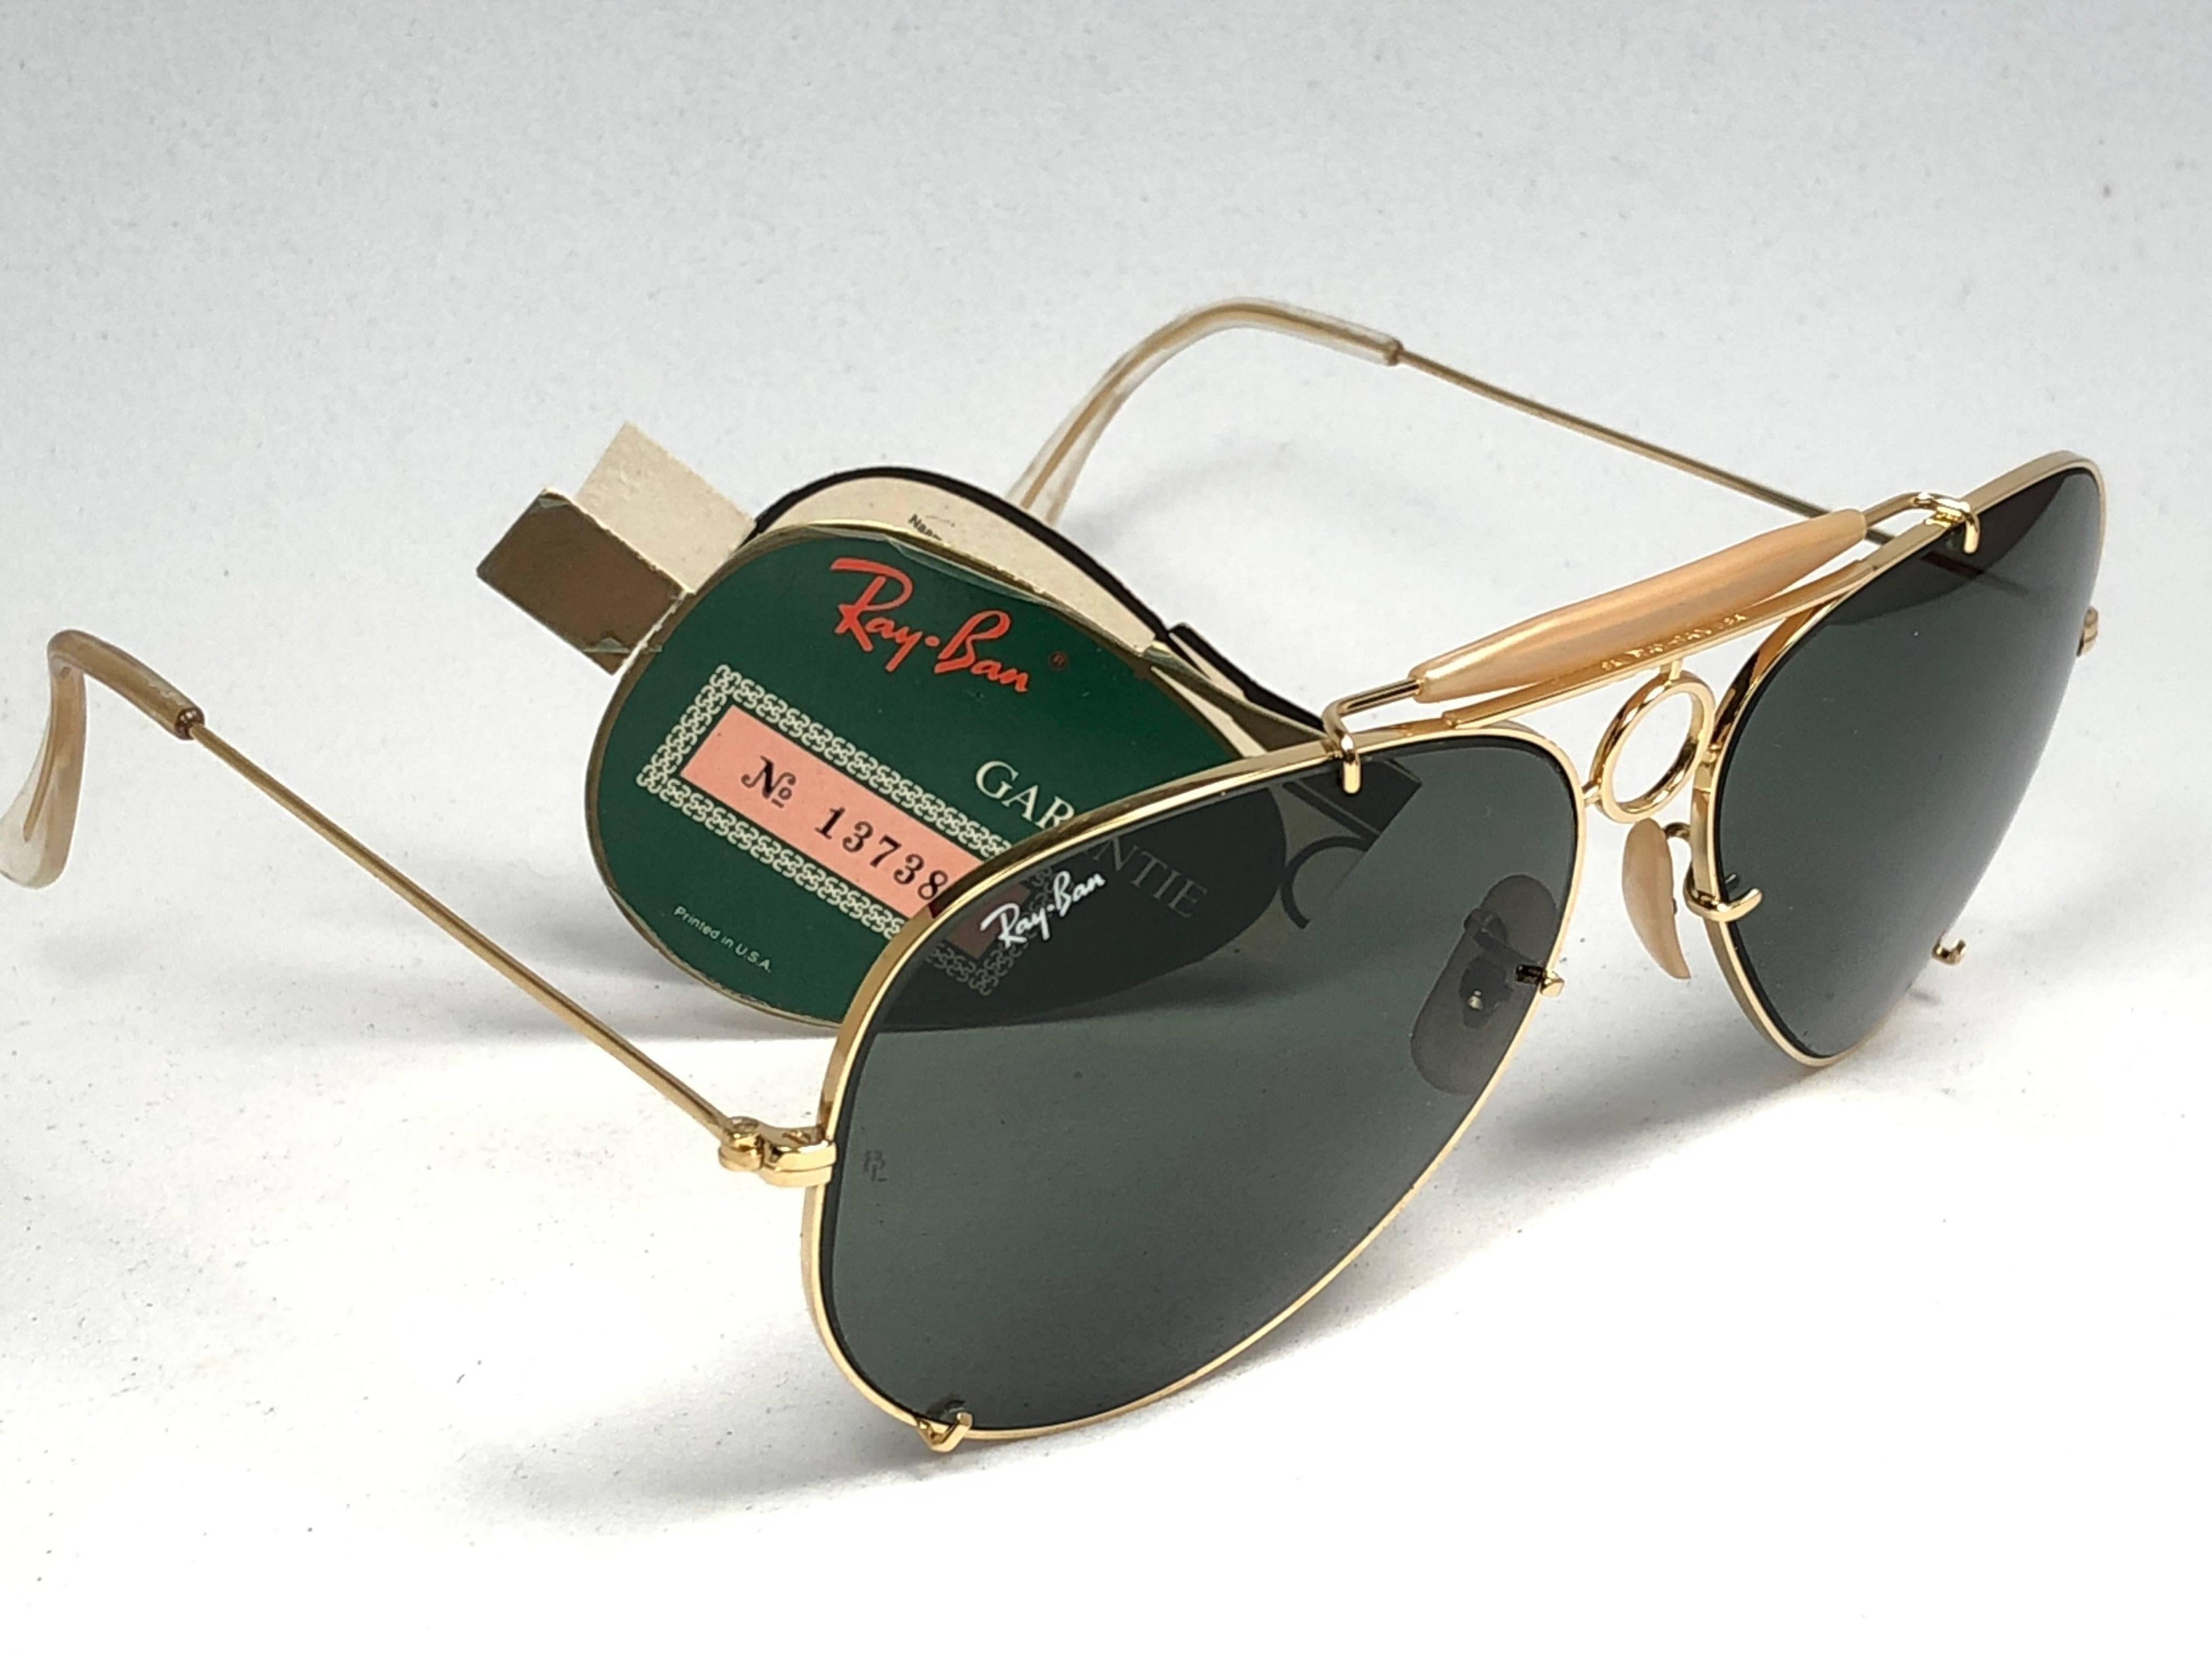 New Vintage Ray Ban Sharpshooter 62mm. B&L etched in both G15 Grey lenses.  
Comes with its original Ray Ban B&L case. This pair may show minor sign of wear due to nearly 40 years of storage.
A seldom piece in never worn or displayed condition.